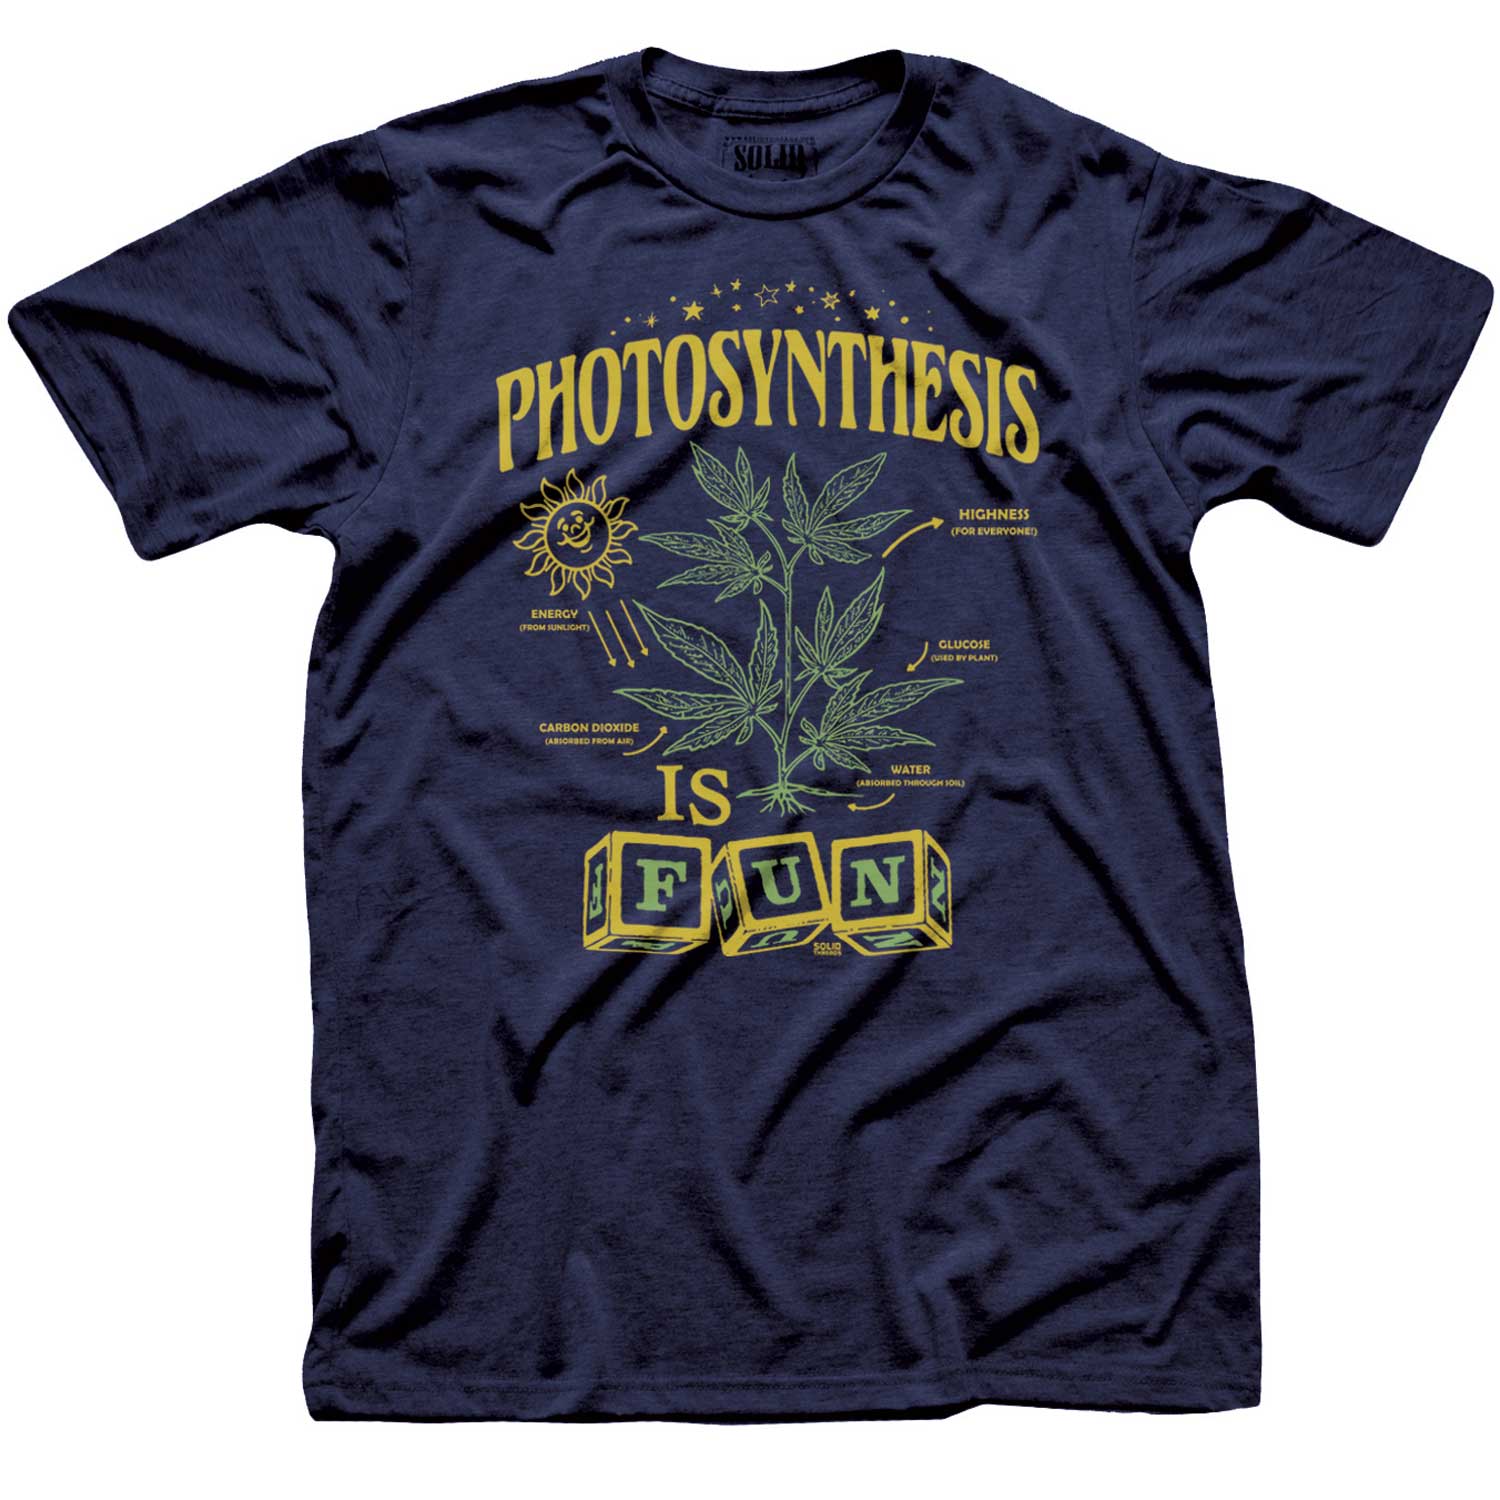 Men's Photosynthesis is Fun Vintage Graphic Tee | Funny Marijuana Triblend T-Shirt | SOLID THREADS